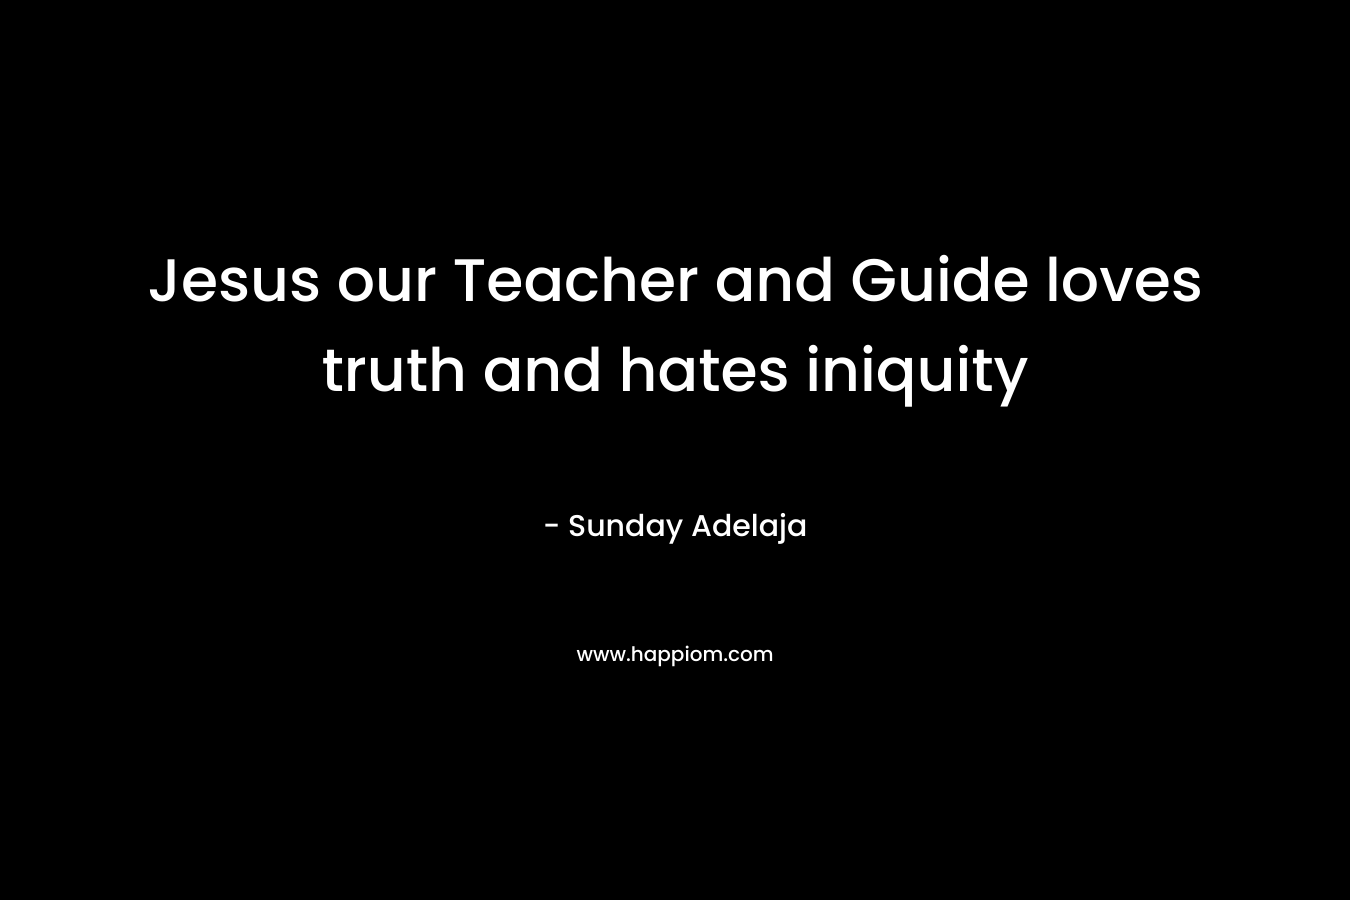 Jesus our Teacher and Guide loves truth and hates iniquity